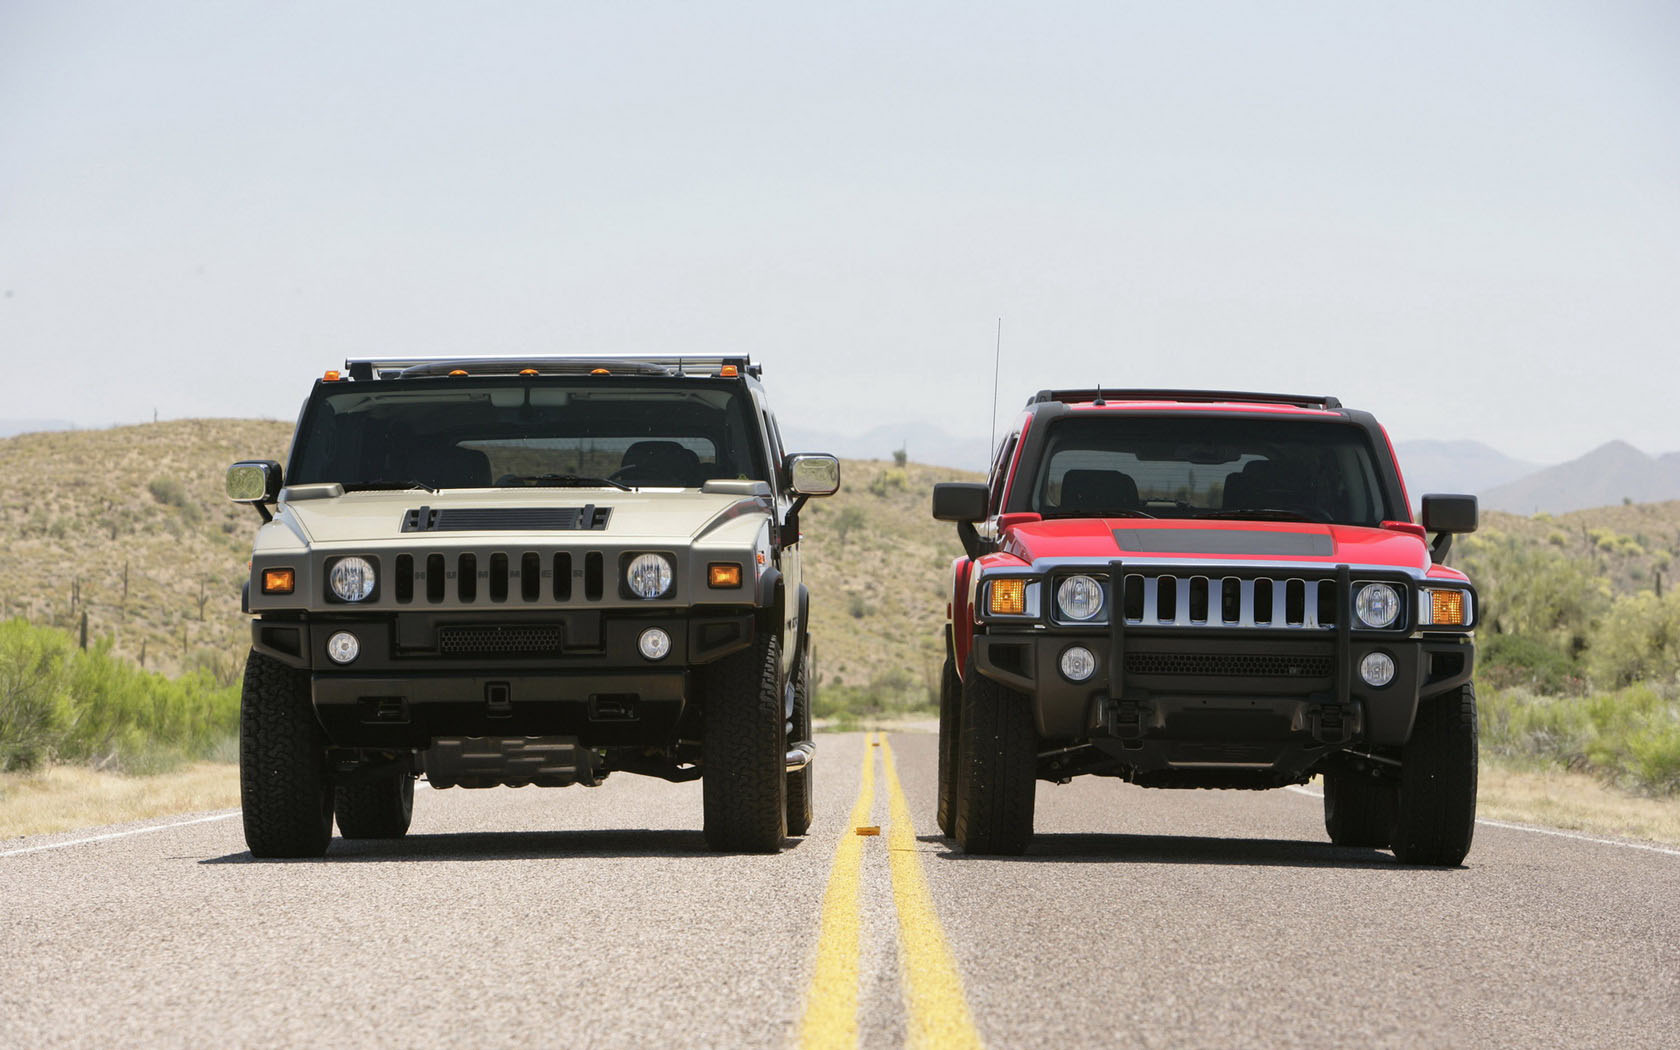 Hummer H2 And H3 Suvs Factory Direct - 1680x1050 Wallpaper 